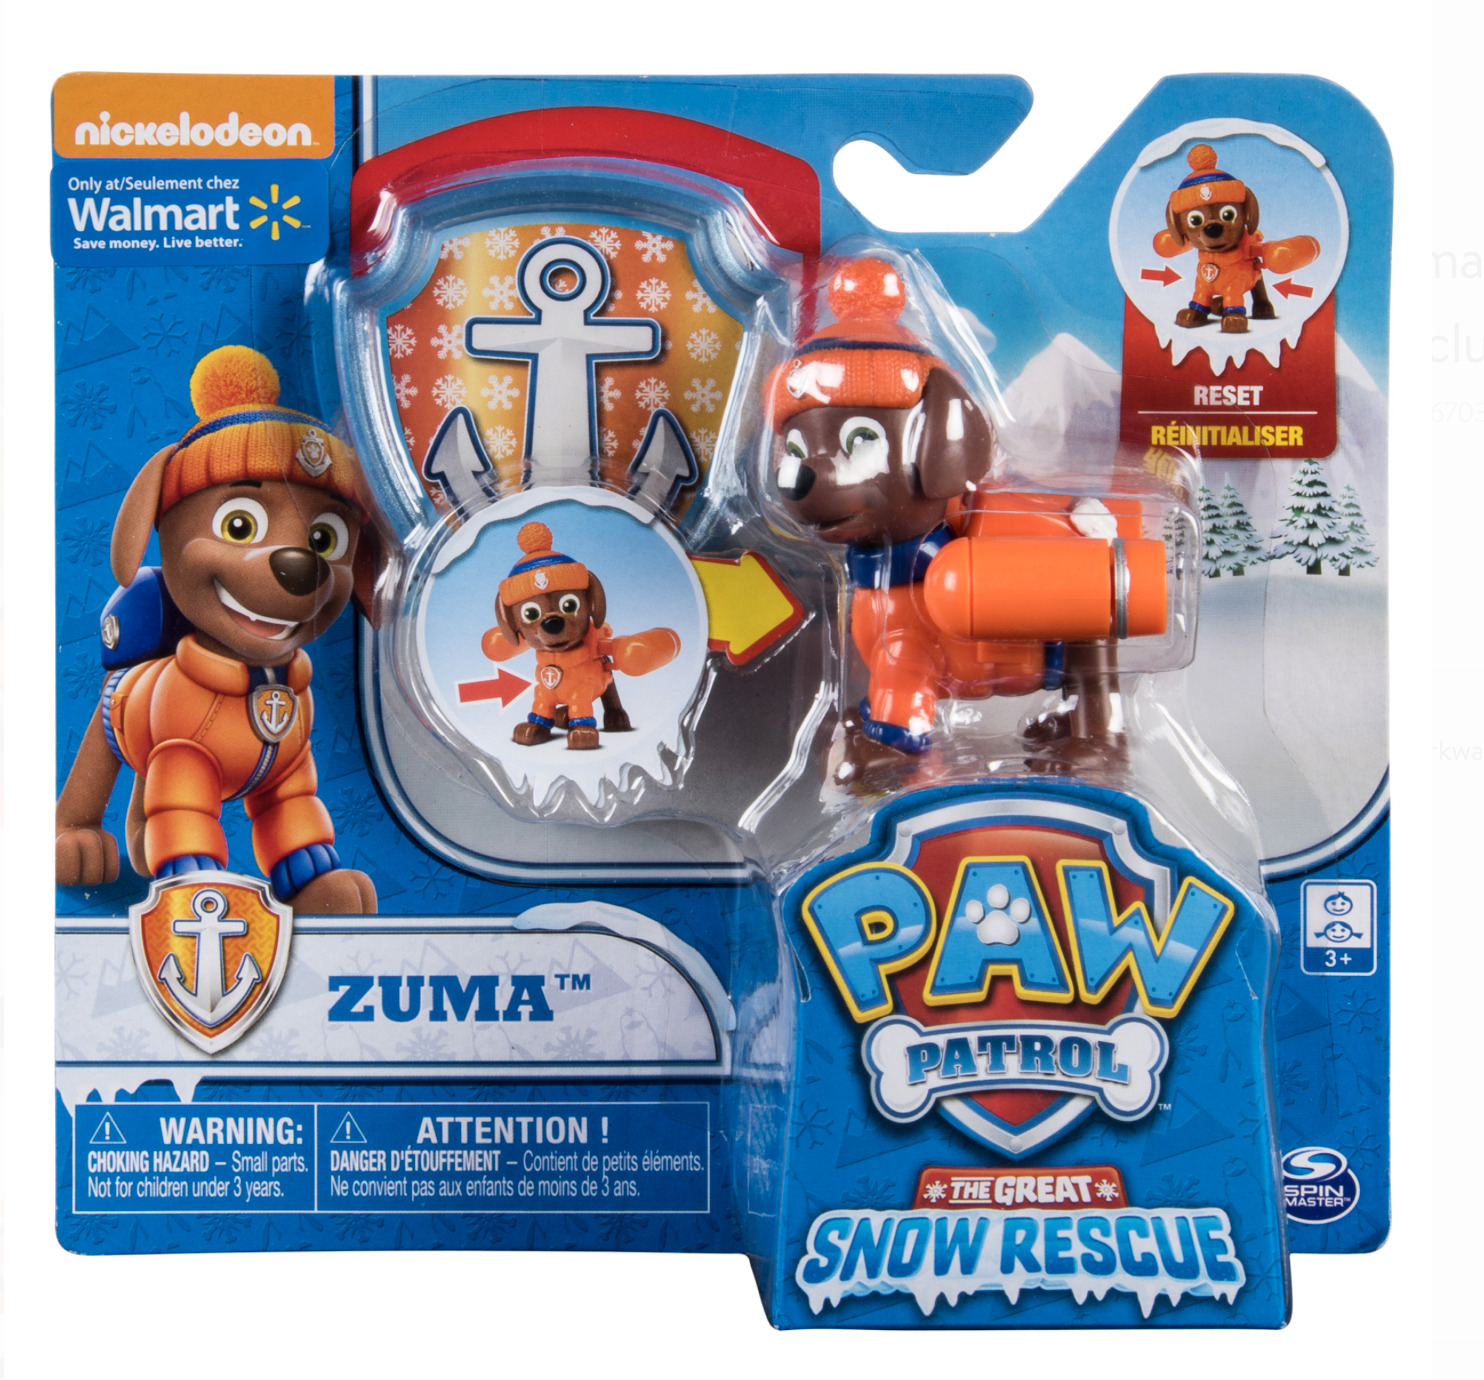 Paw Patrol Snow Rescue - Zuma with Transforming Pup Pack & Badge! New in Box!